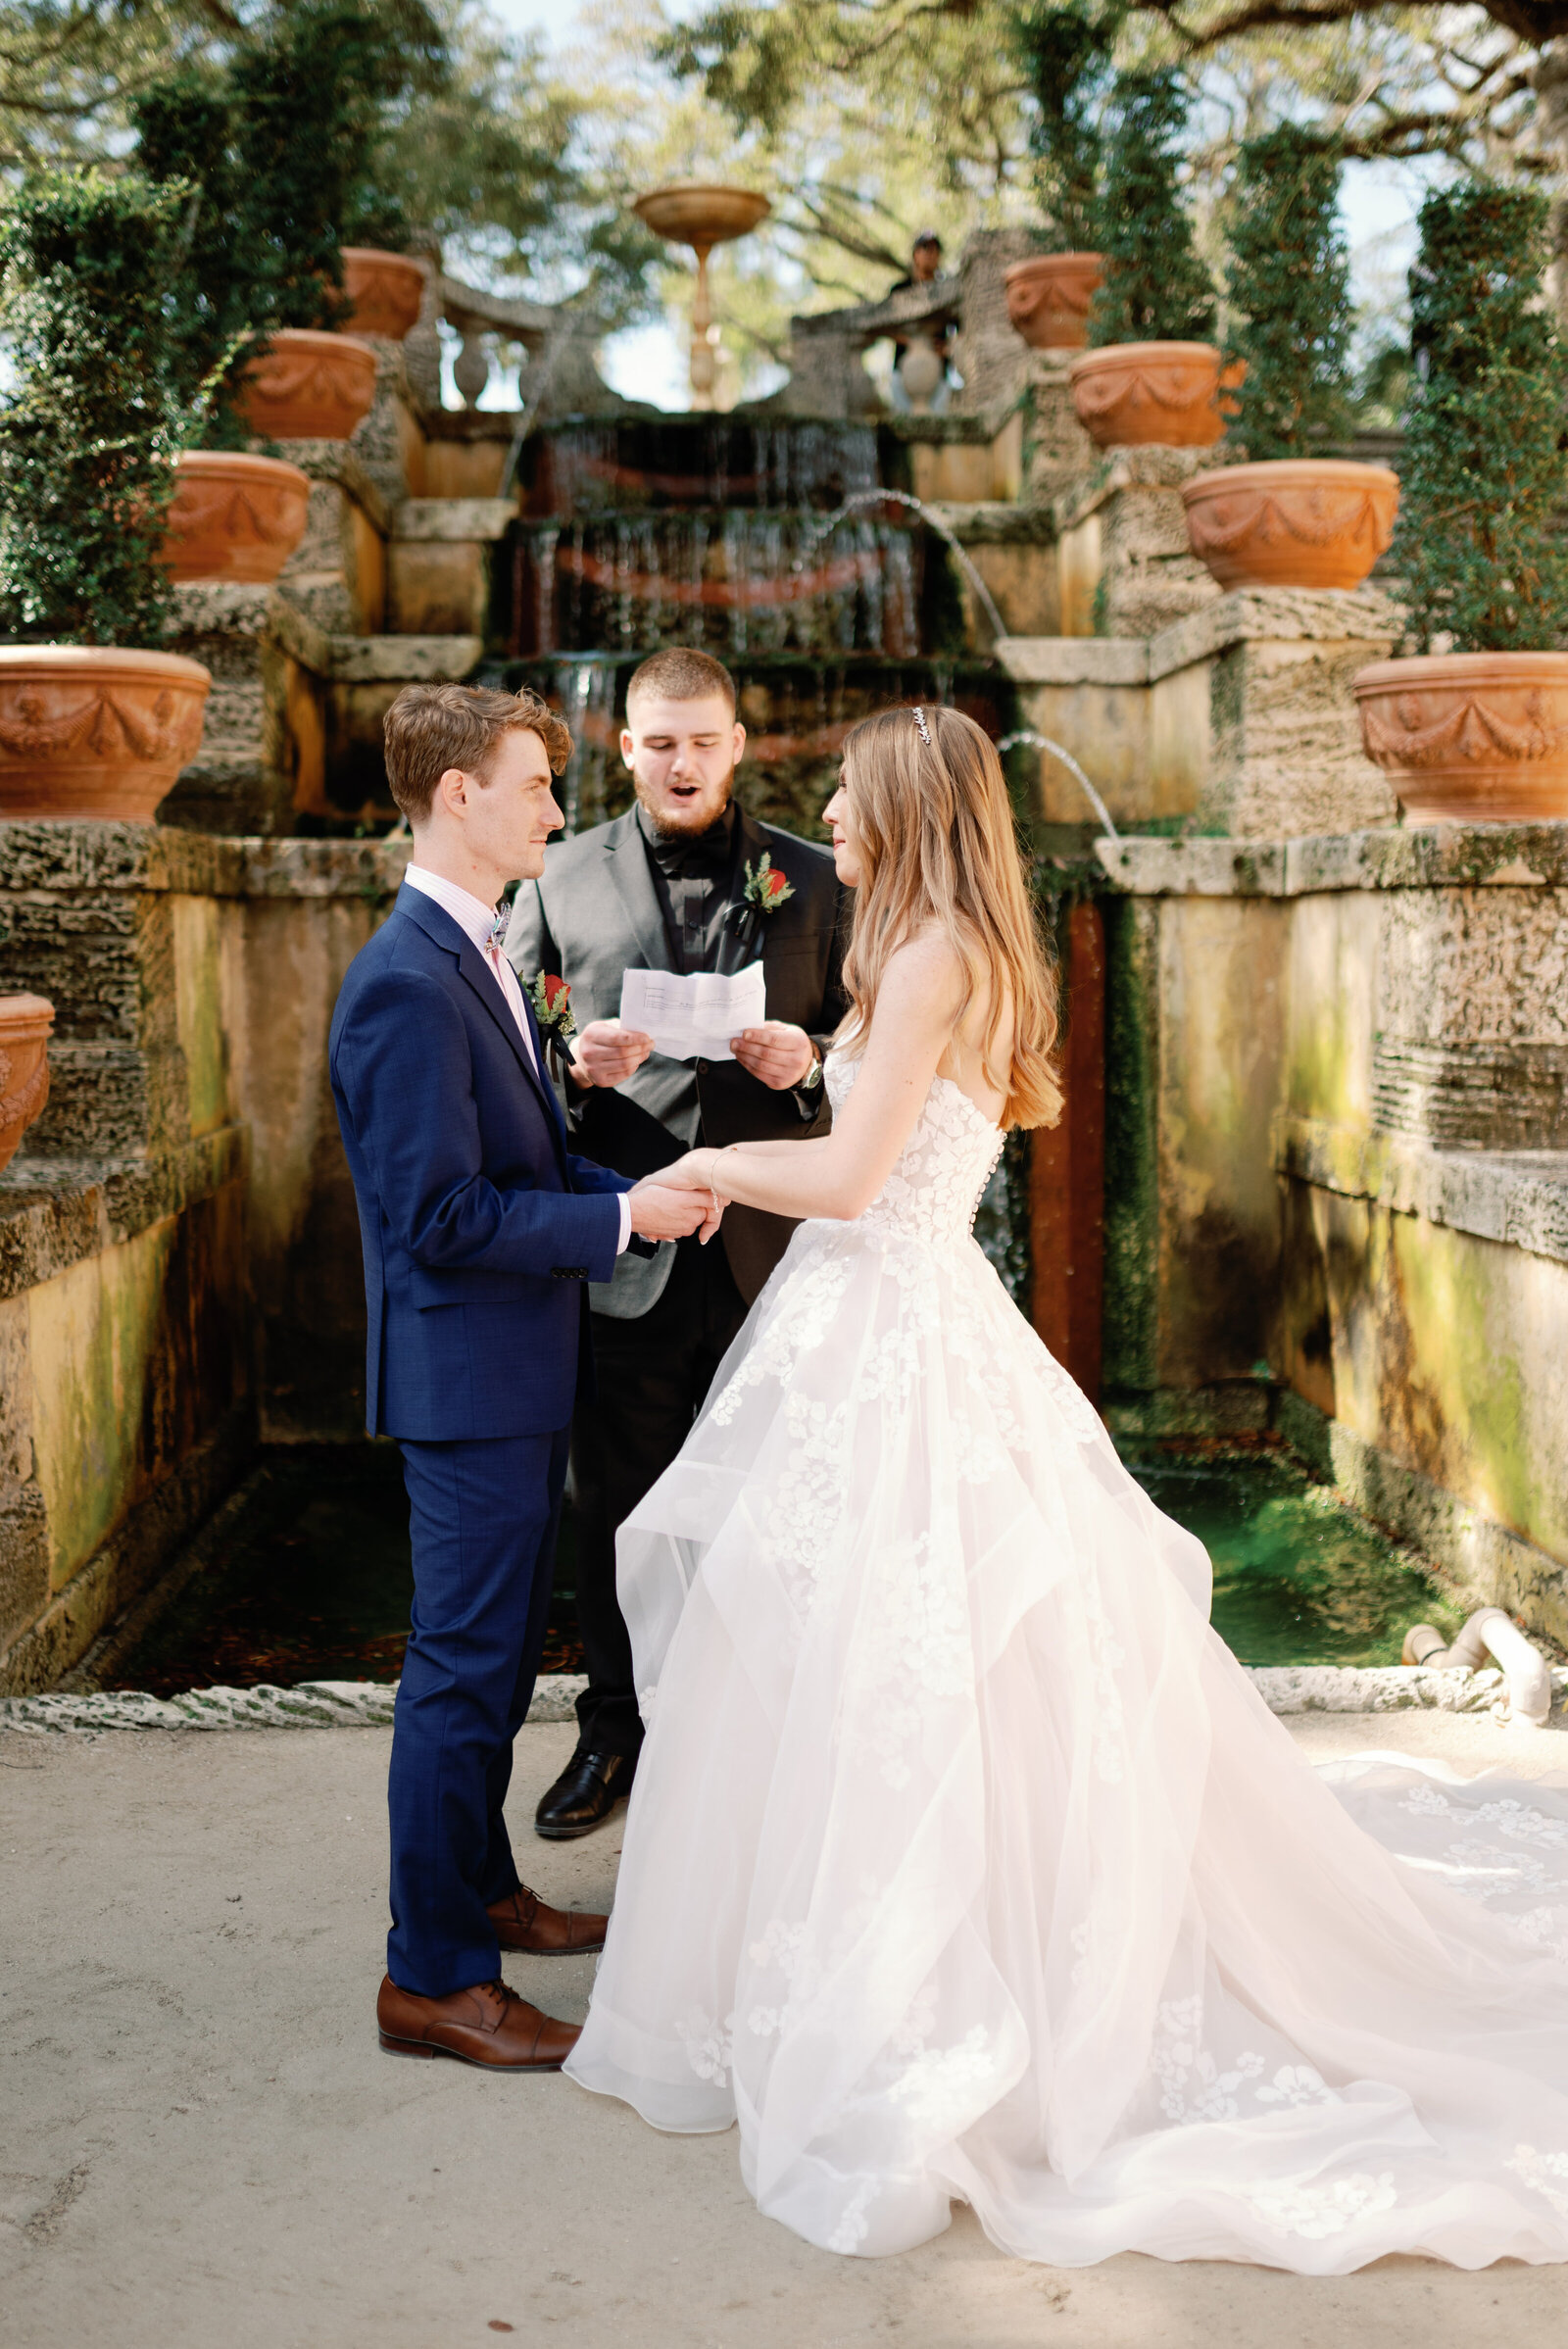 Bride and groom standing at their altar, in front of a fountain in the garden at Vizcaya